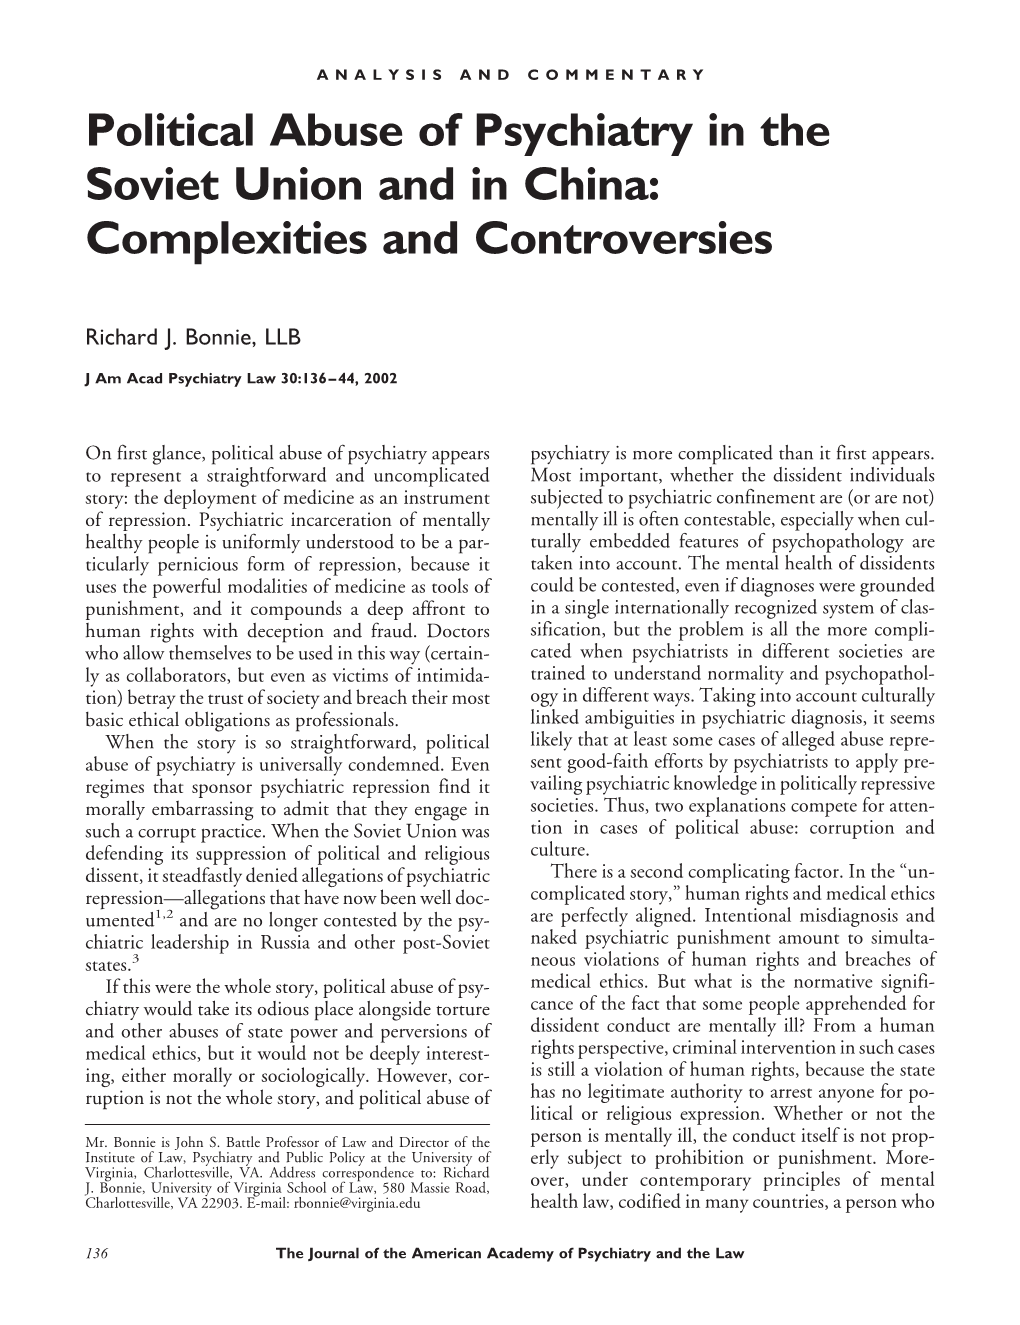 Political Abuse of Psychiatry in the Soviet Union and in China: Complexities and Controversies